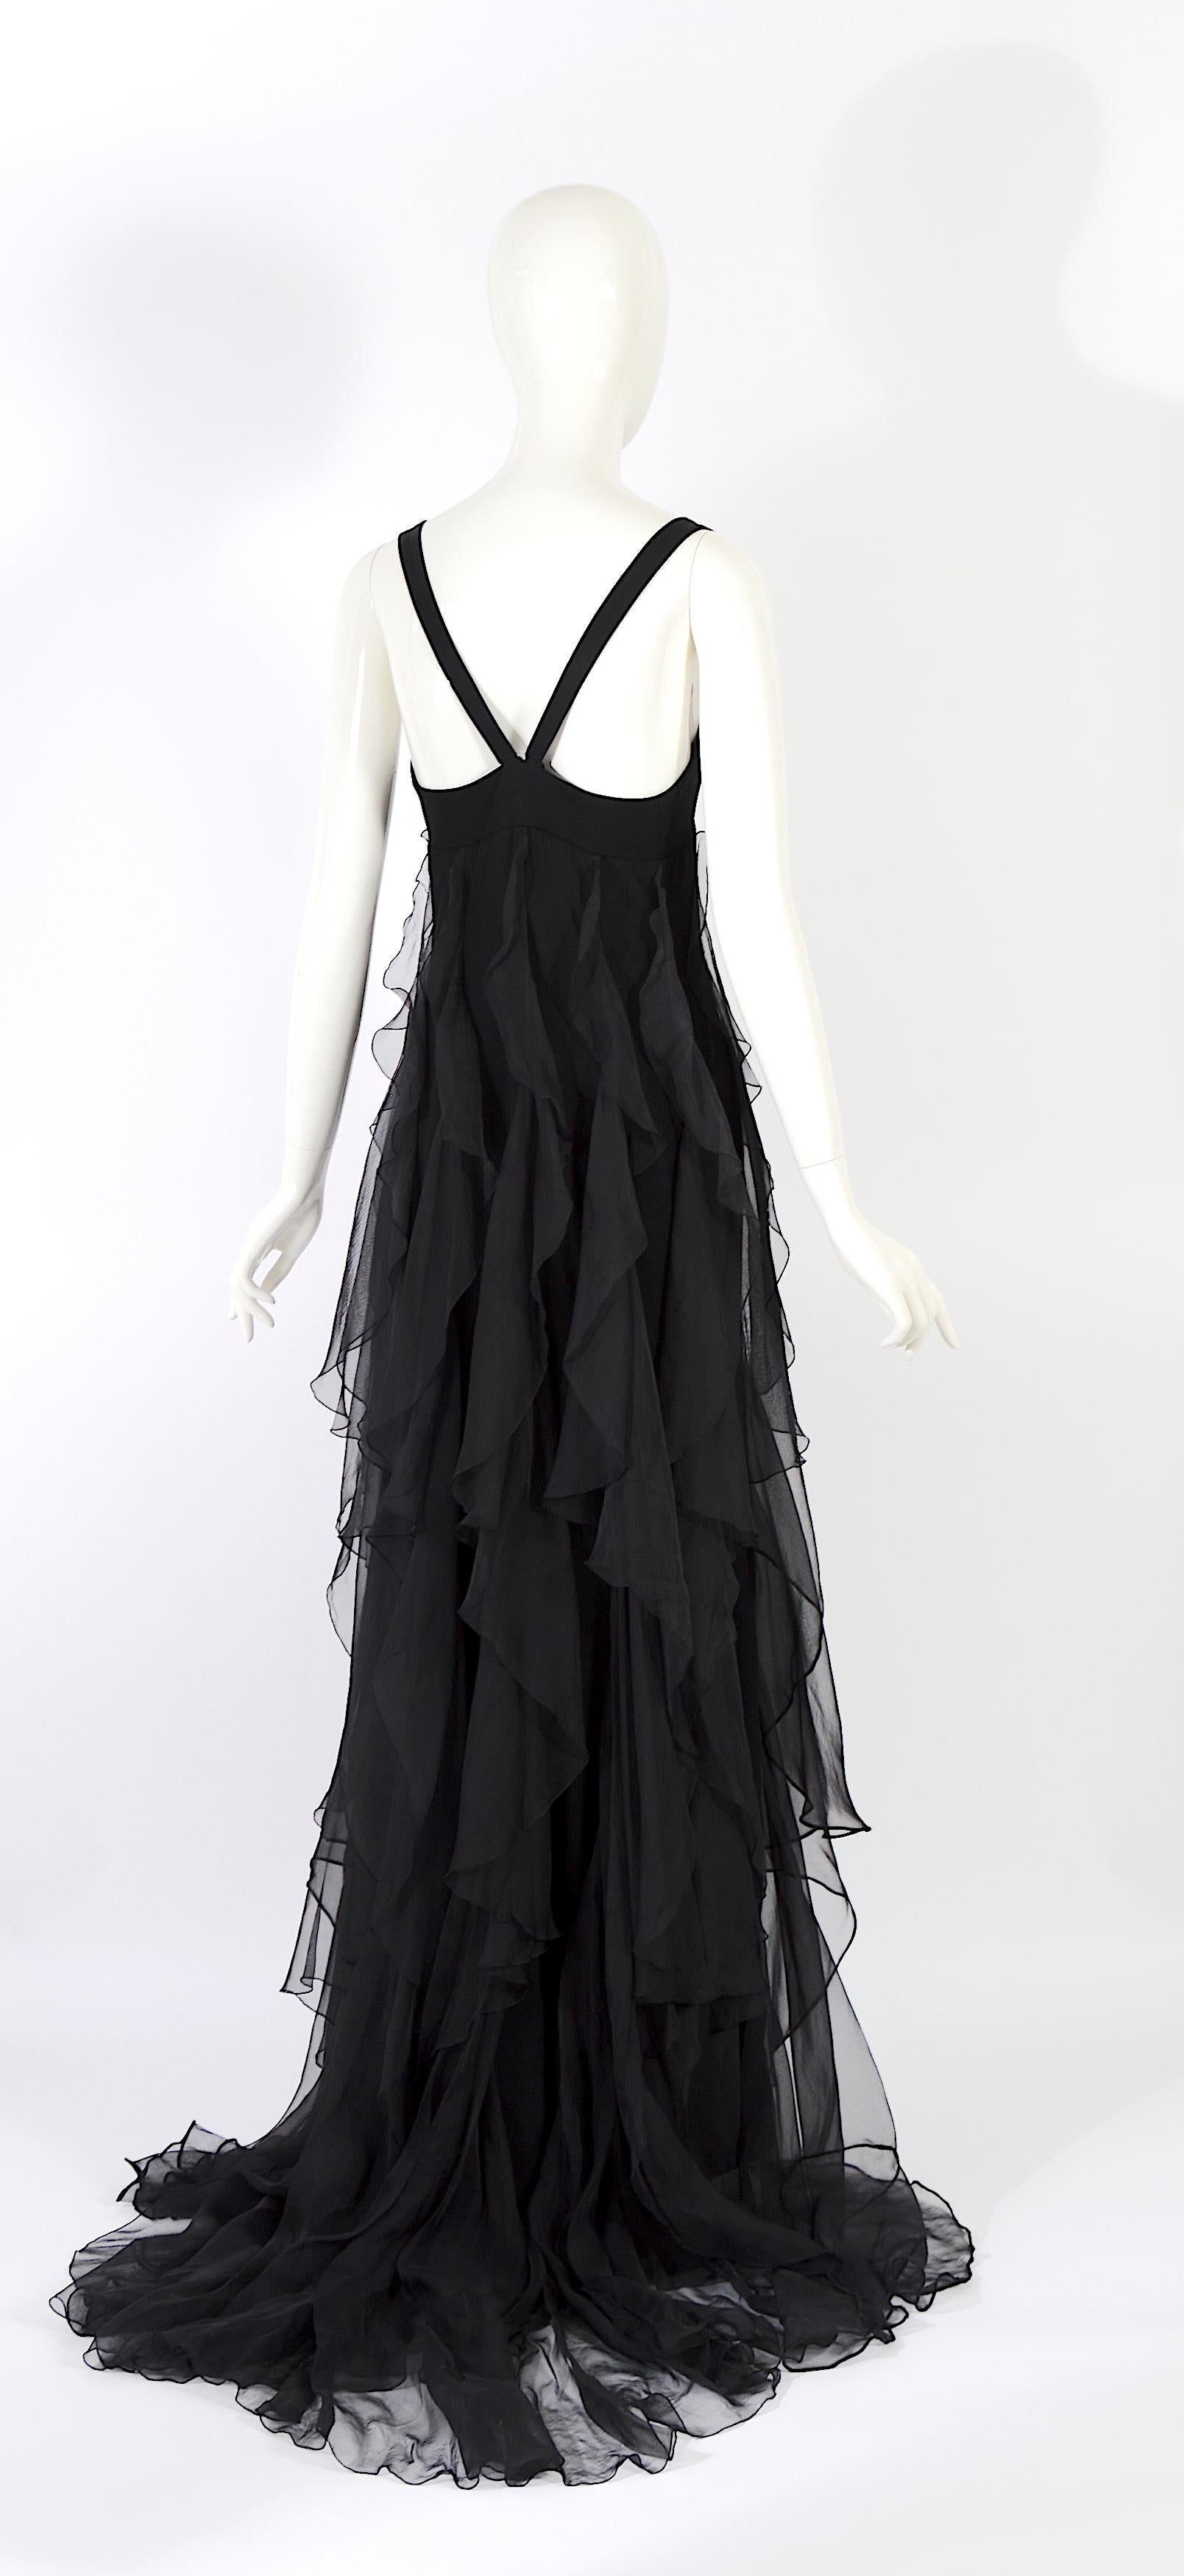 Christian Dior by Gianfranco Ferre S/S 1994 vintage black silk evening dress For Sale 3